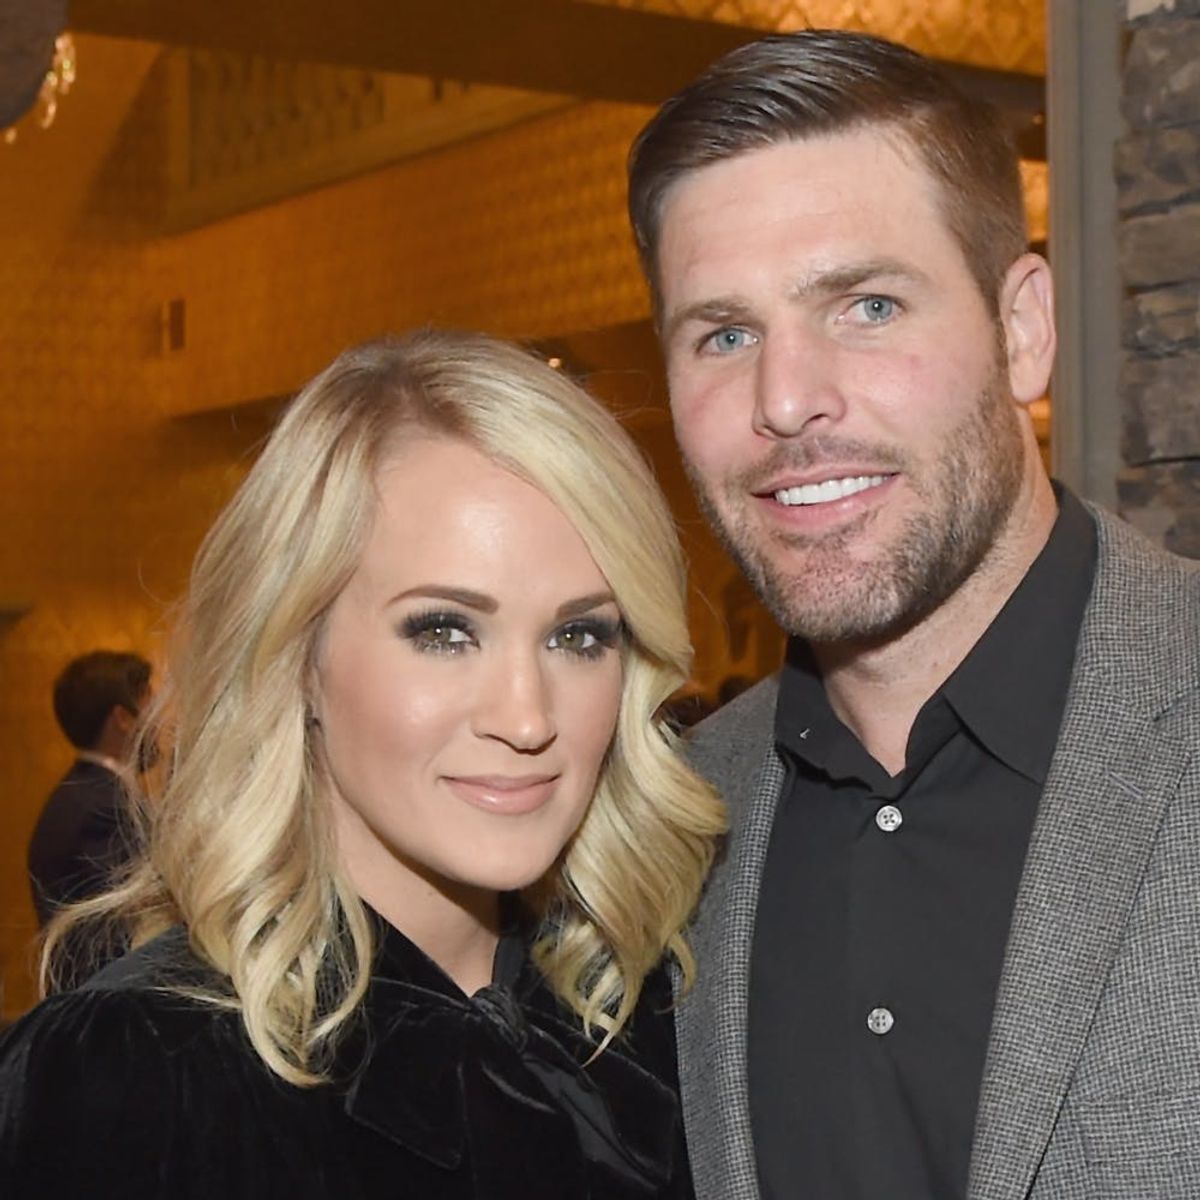 Watch Mike Fisher’s Hilarious Attempt to Sing Wife Carrie Underwood’s Hit “Cry Pretty”